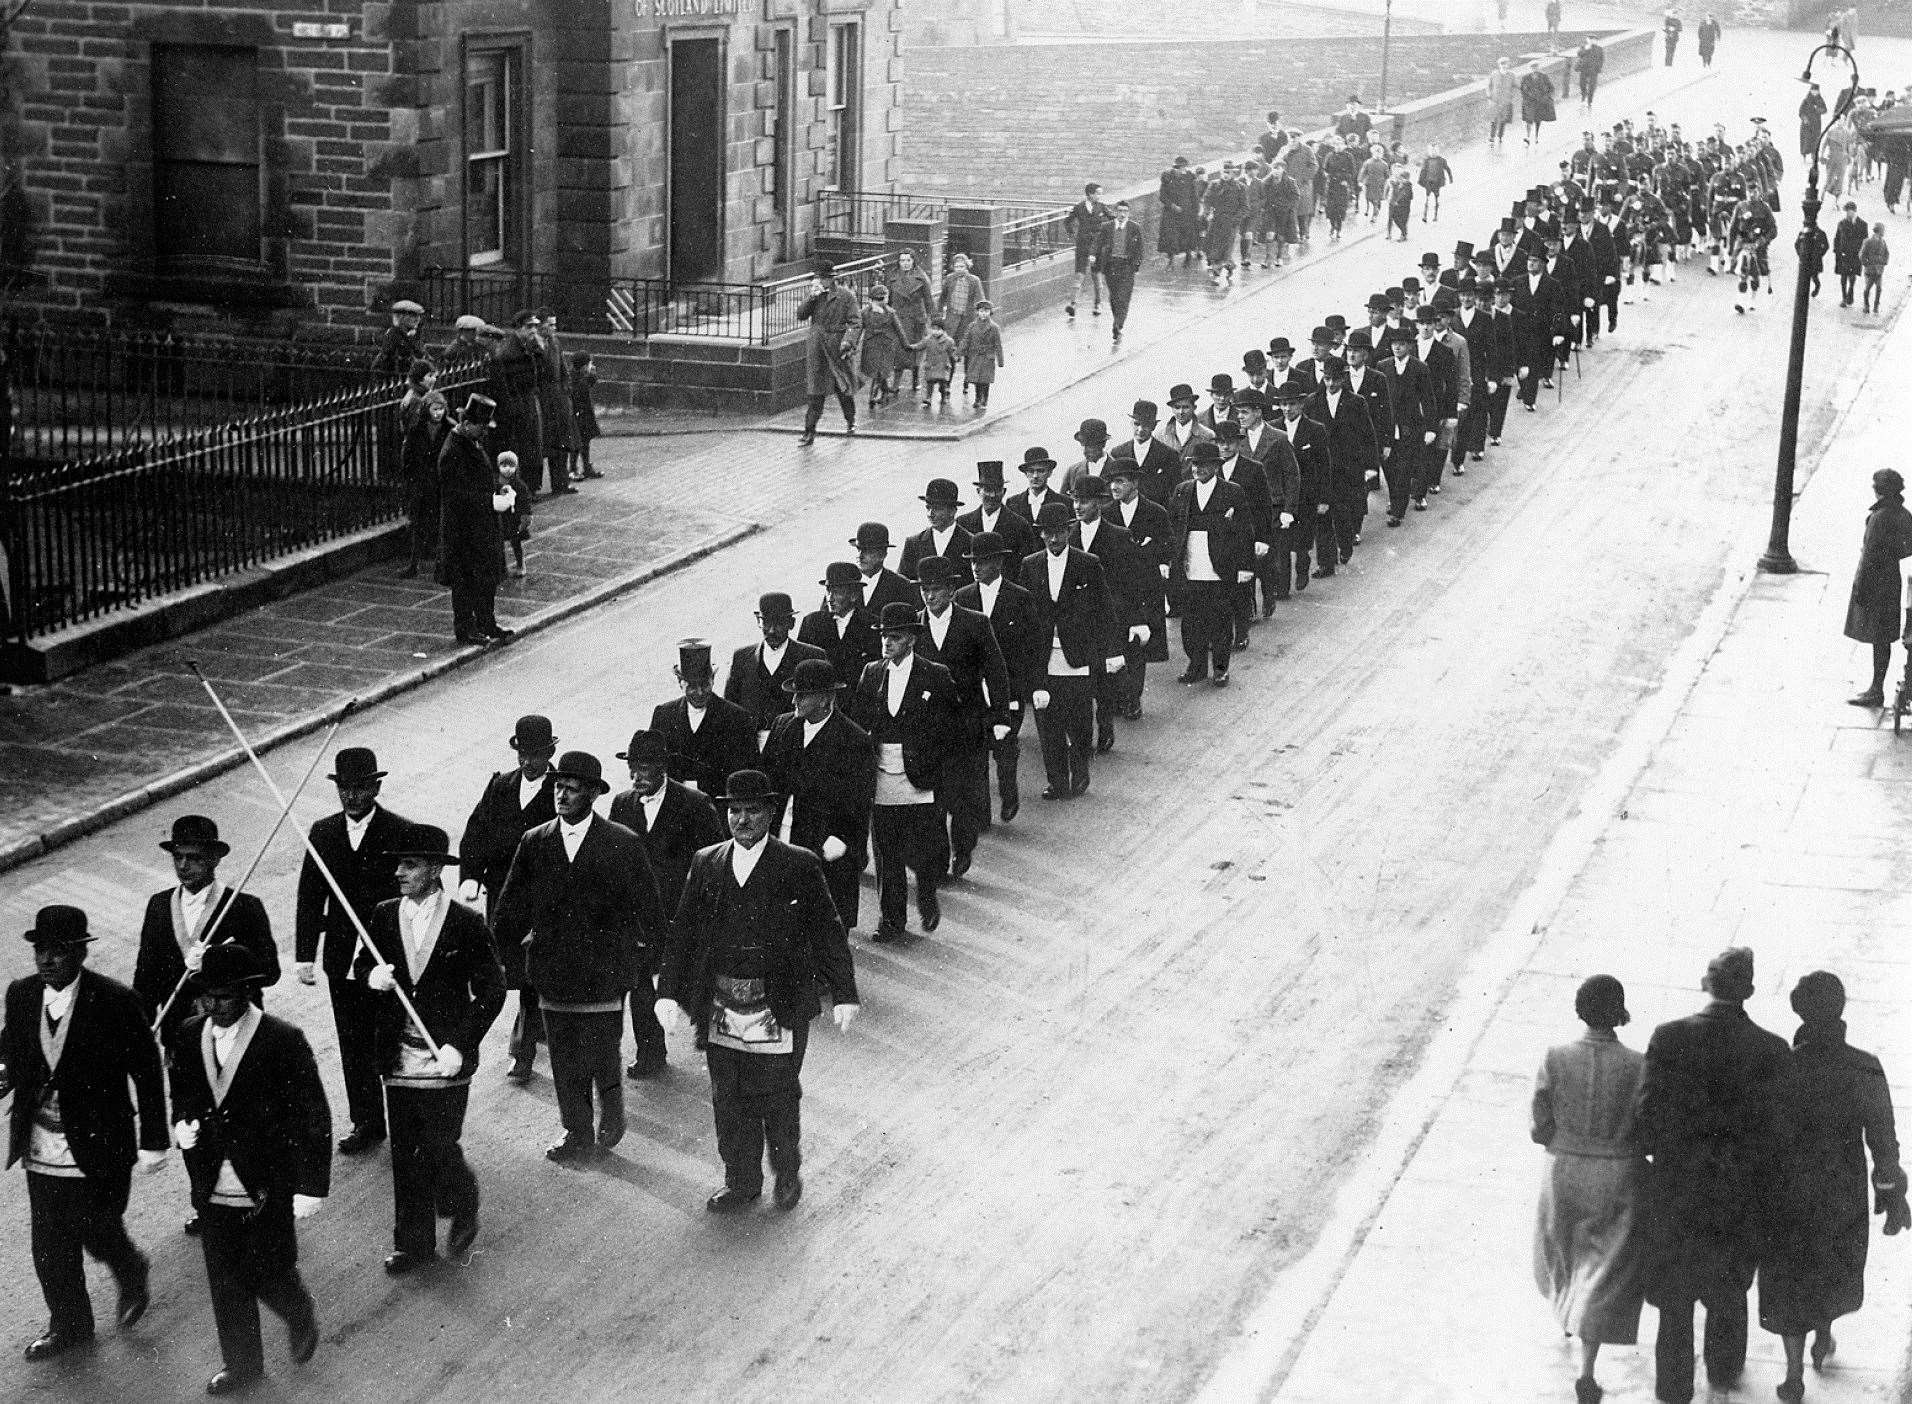 Members of the Masonic lodge on parade in Wick’s Bridge Street, possibly in the late 1940s or the 1950s.